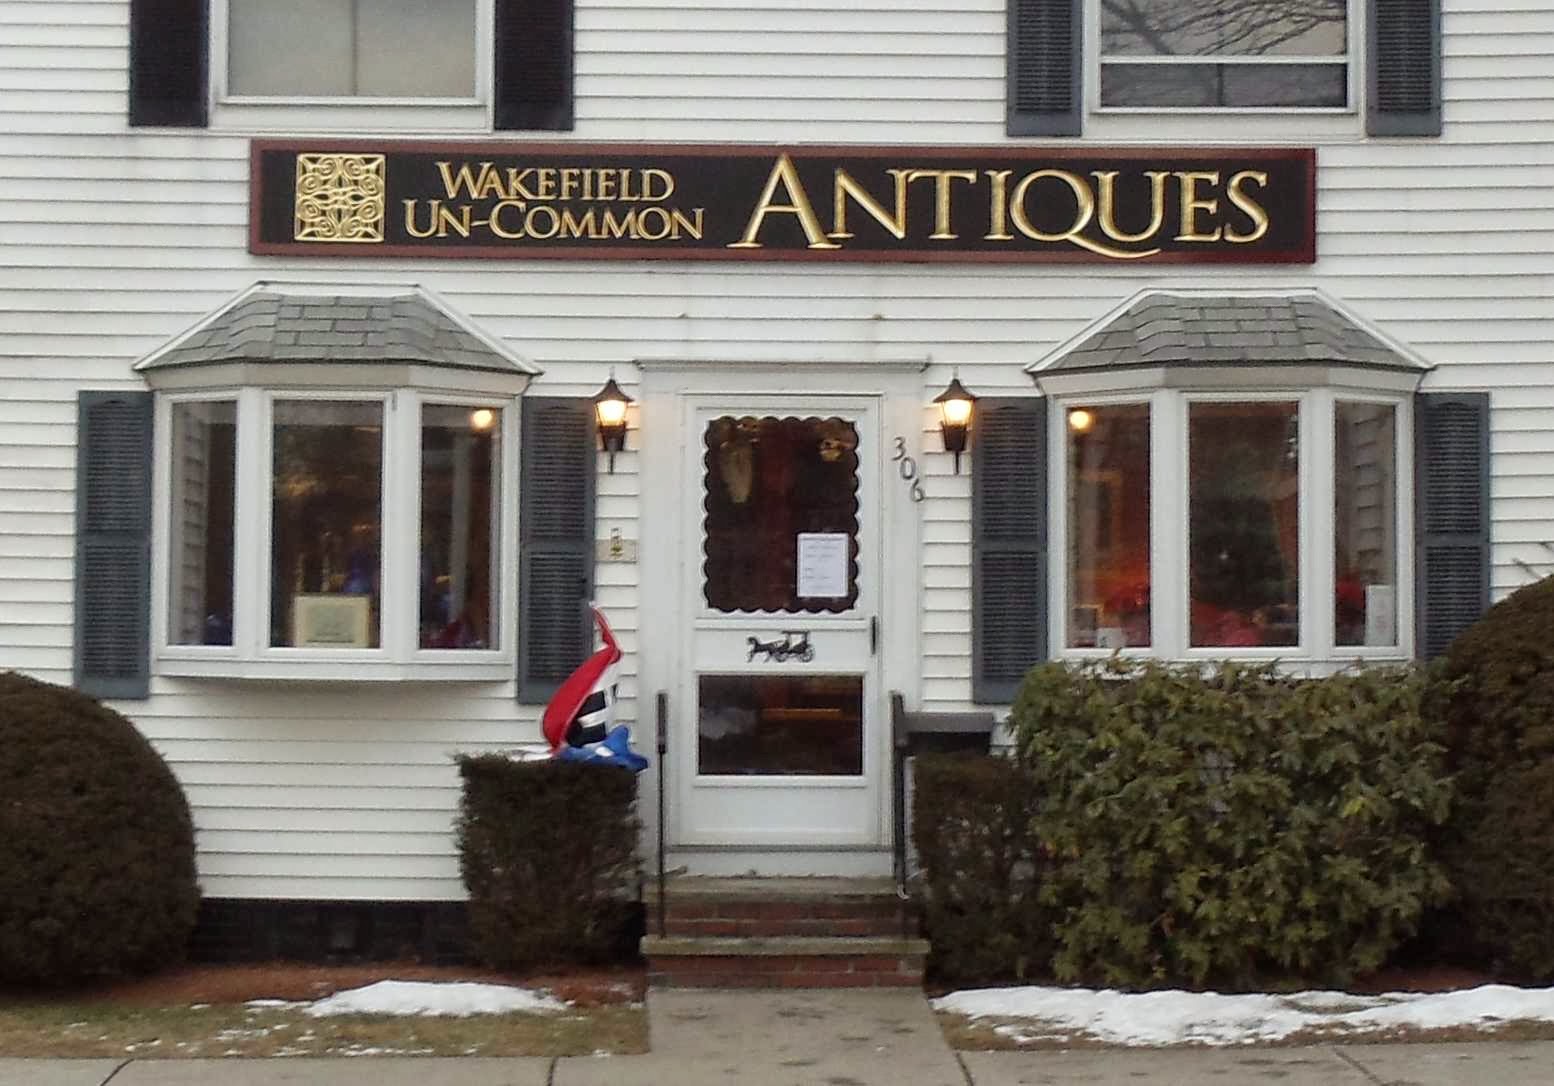 Wakefield Un-Common Antiques & Collectibles